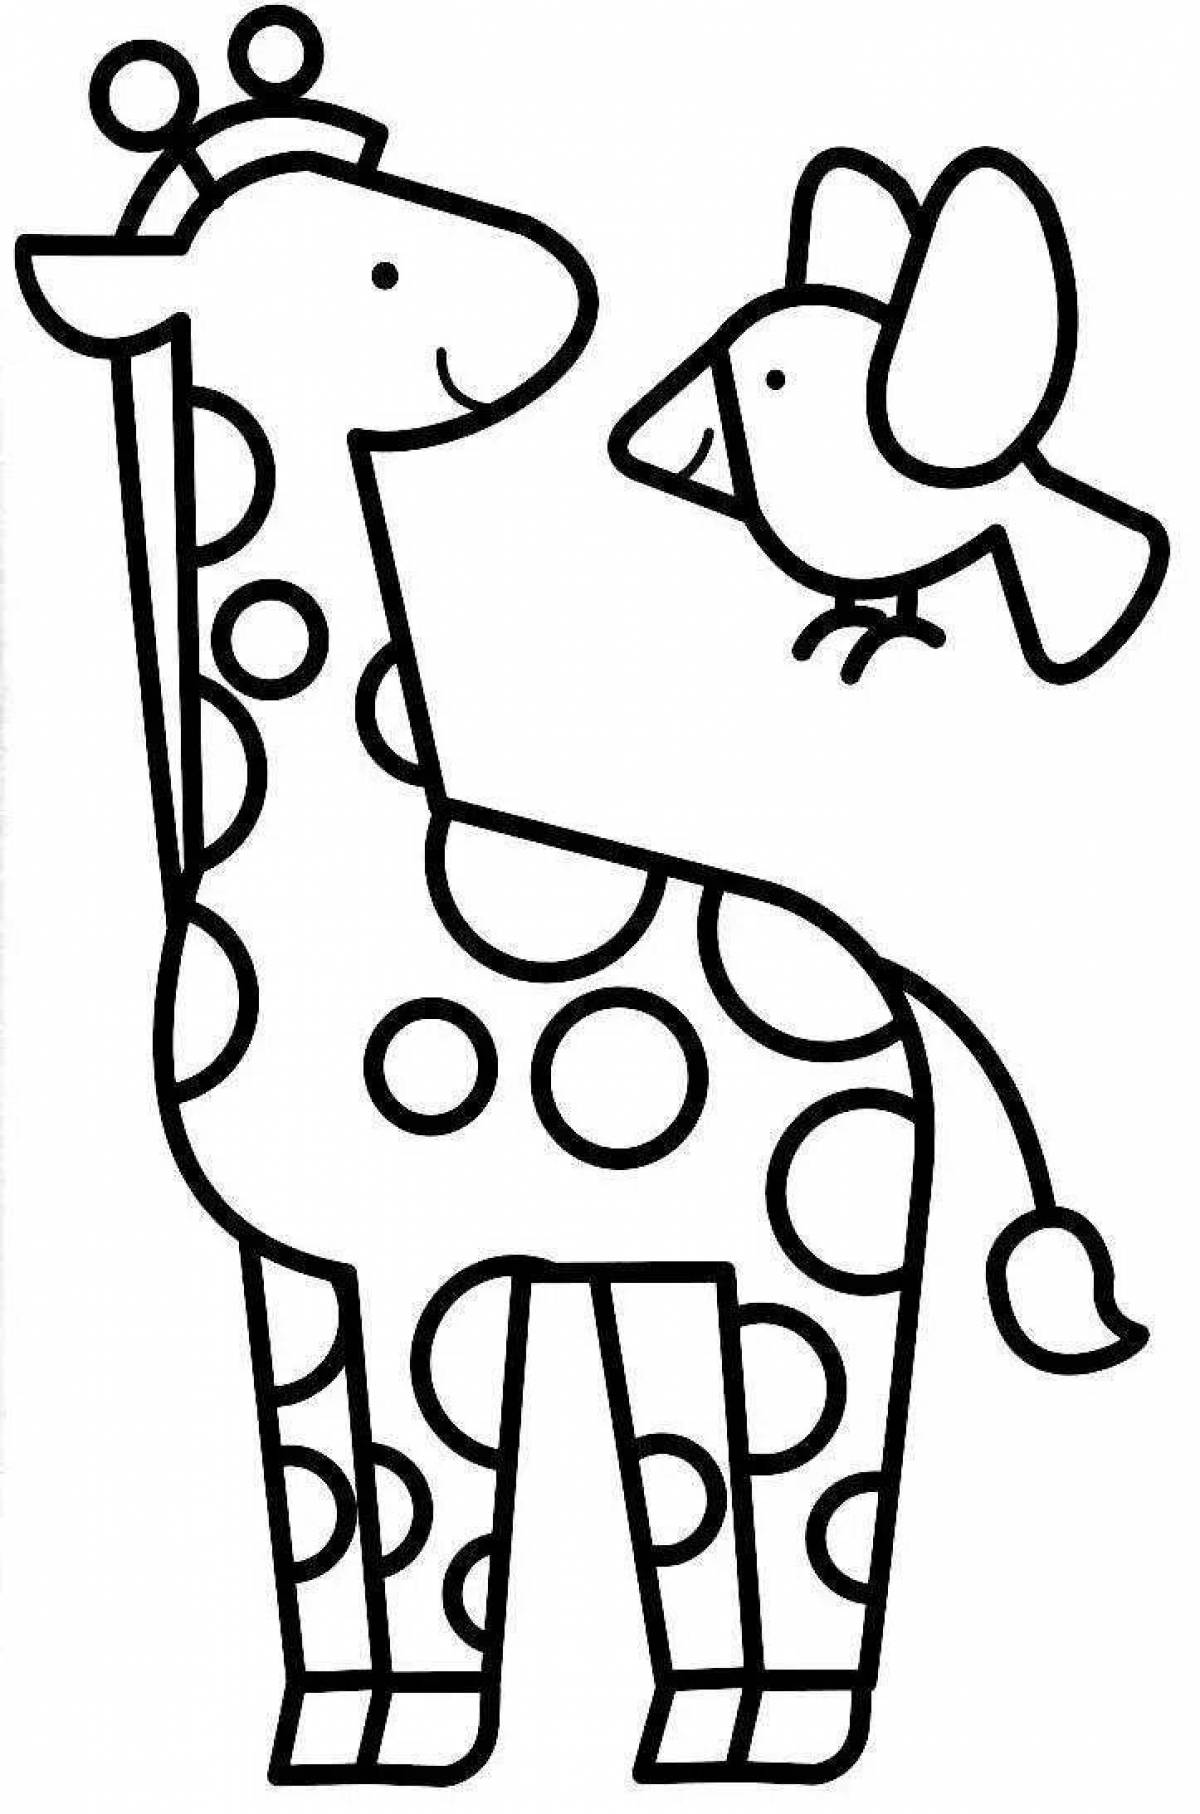 Amazing giraffe coloring pages for kids